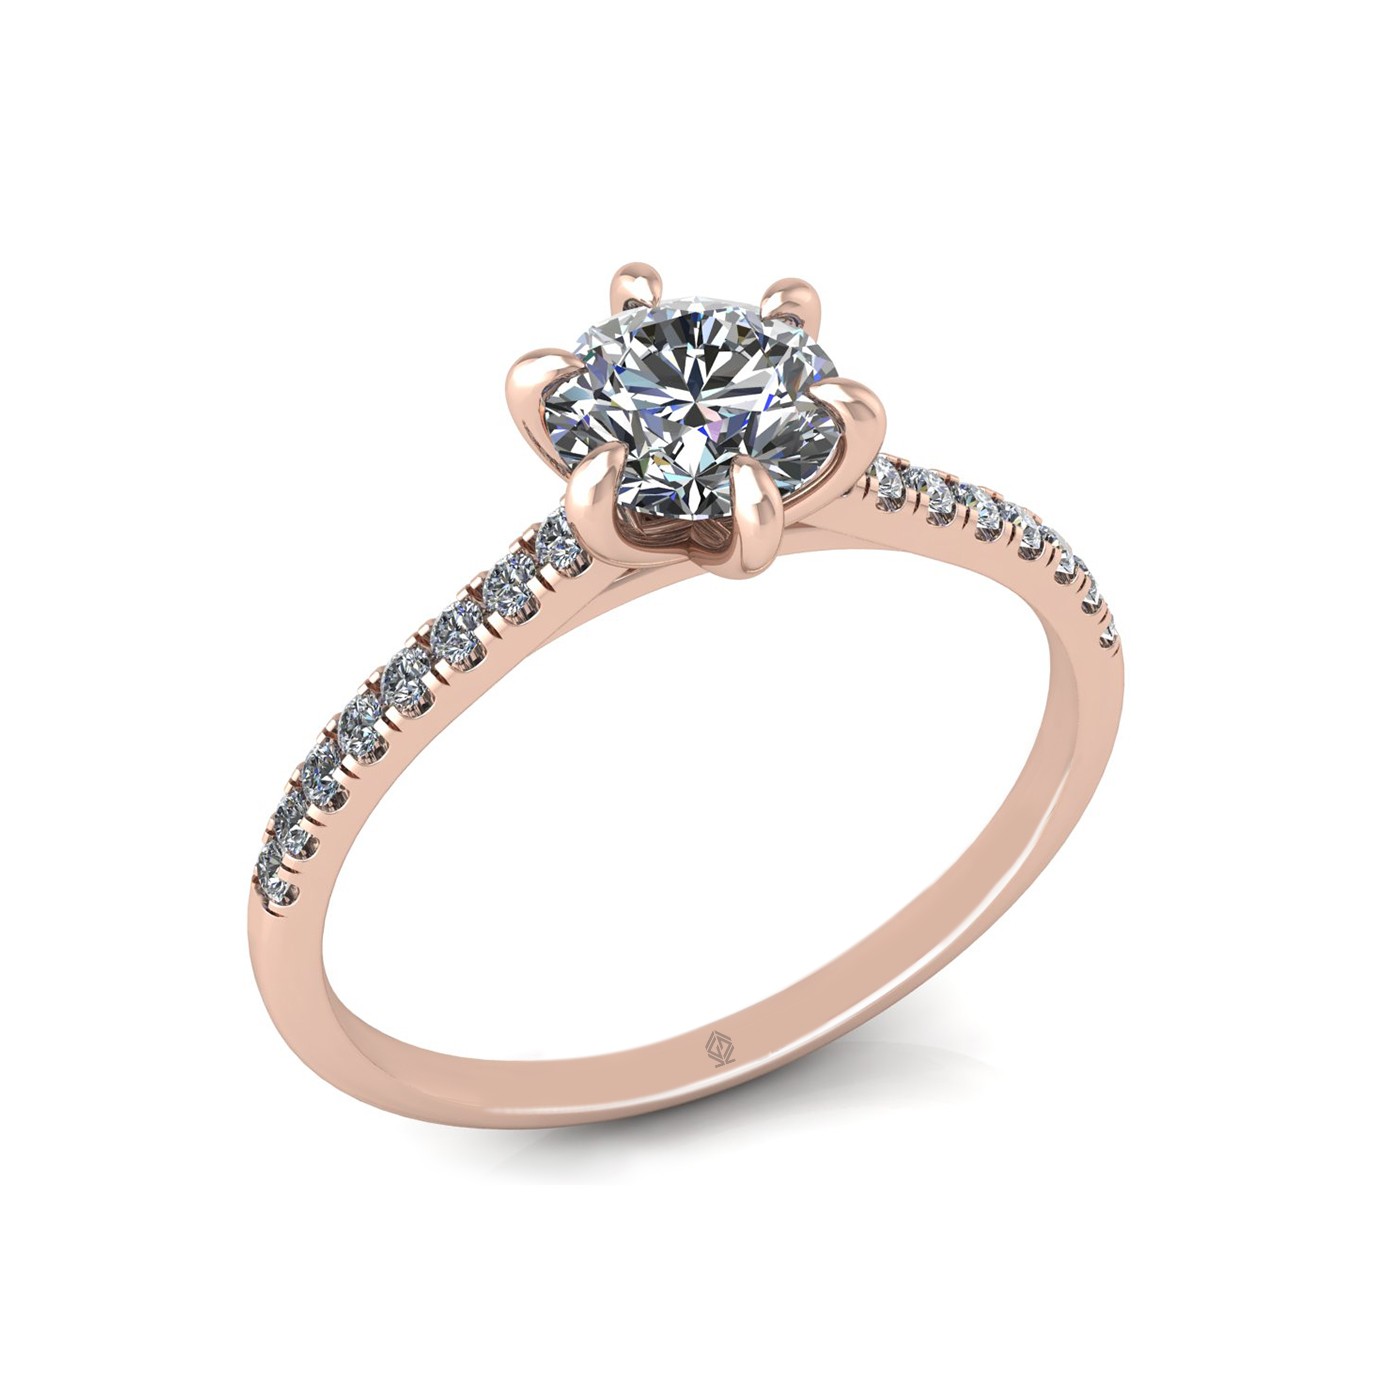 18k rose gold 0,80 ct 6 prongs round cut diamond engagement ring with whisper thin pavÉ set band